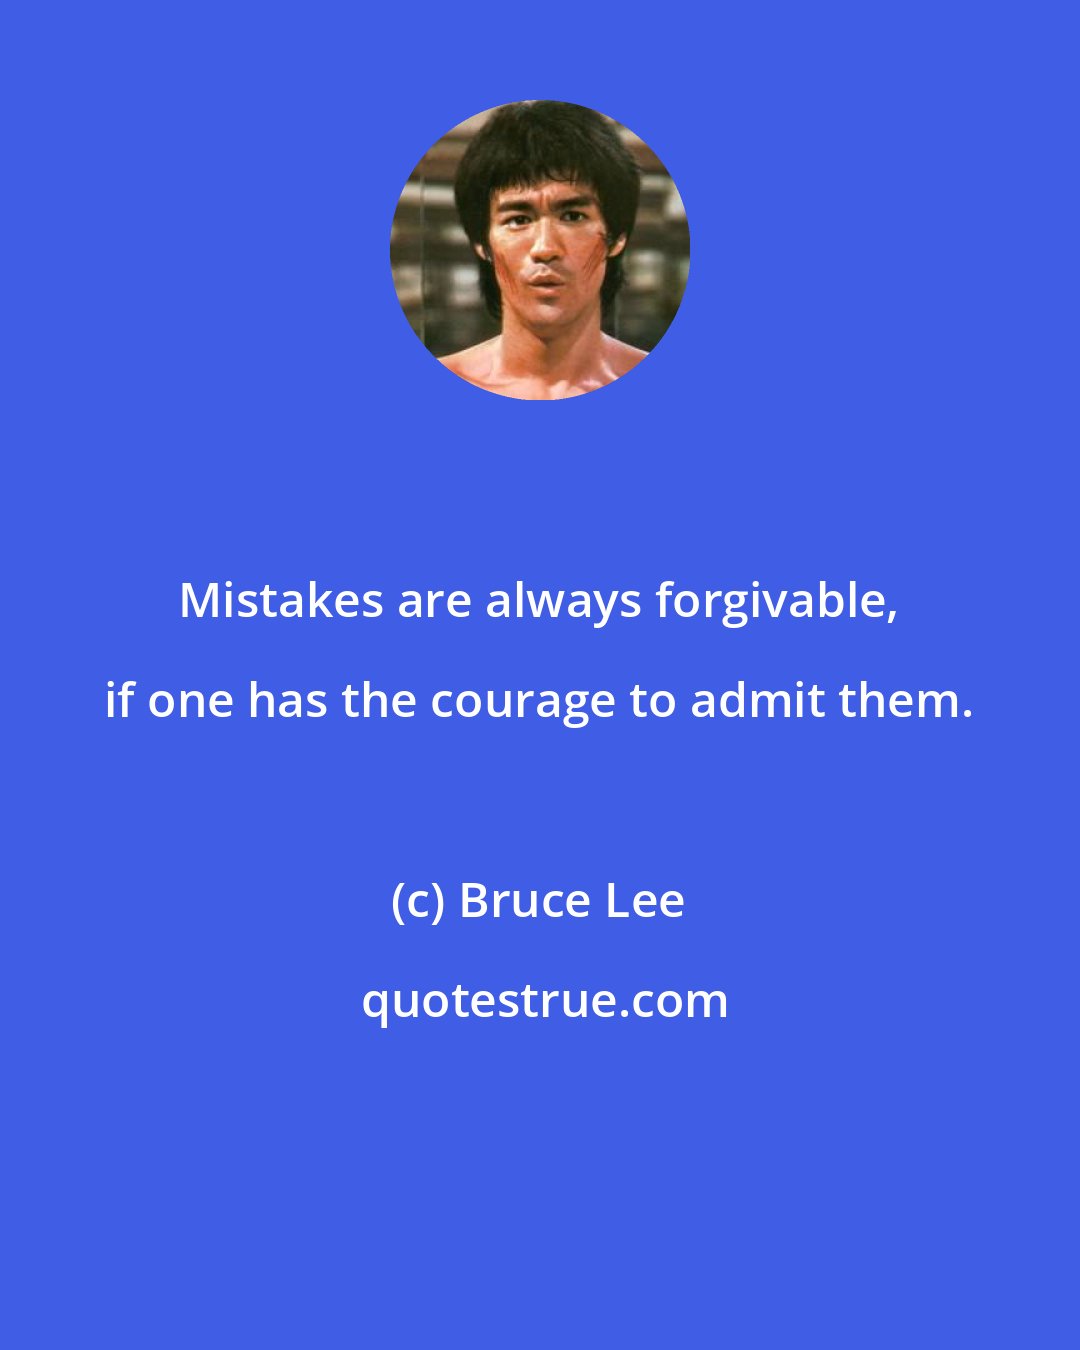 Bruce Lee: Mistakes are always forgivable, if one has the courage to admit them.